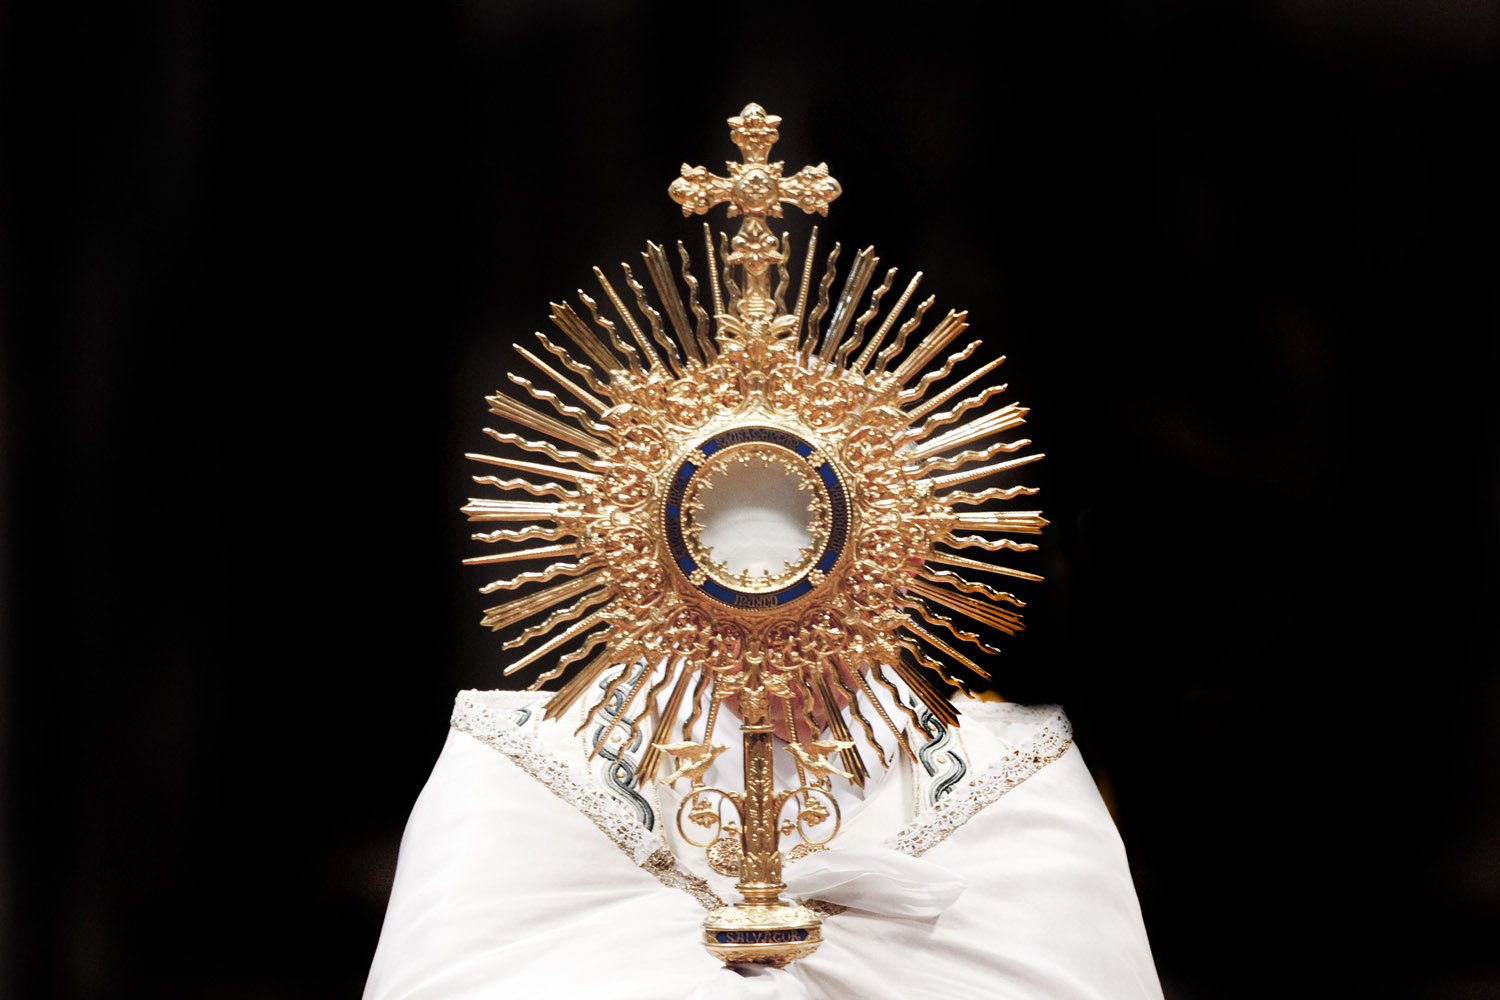 Italy - Religion - Pope Francis leads Worldwide Eucharistic Adoration